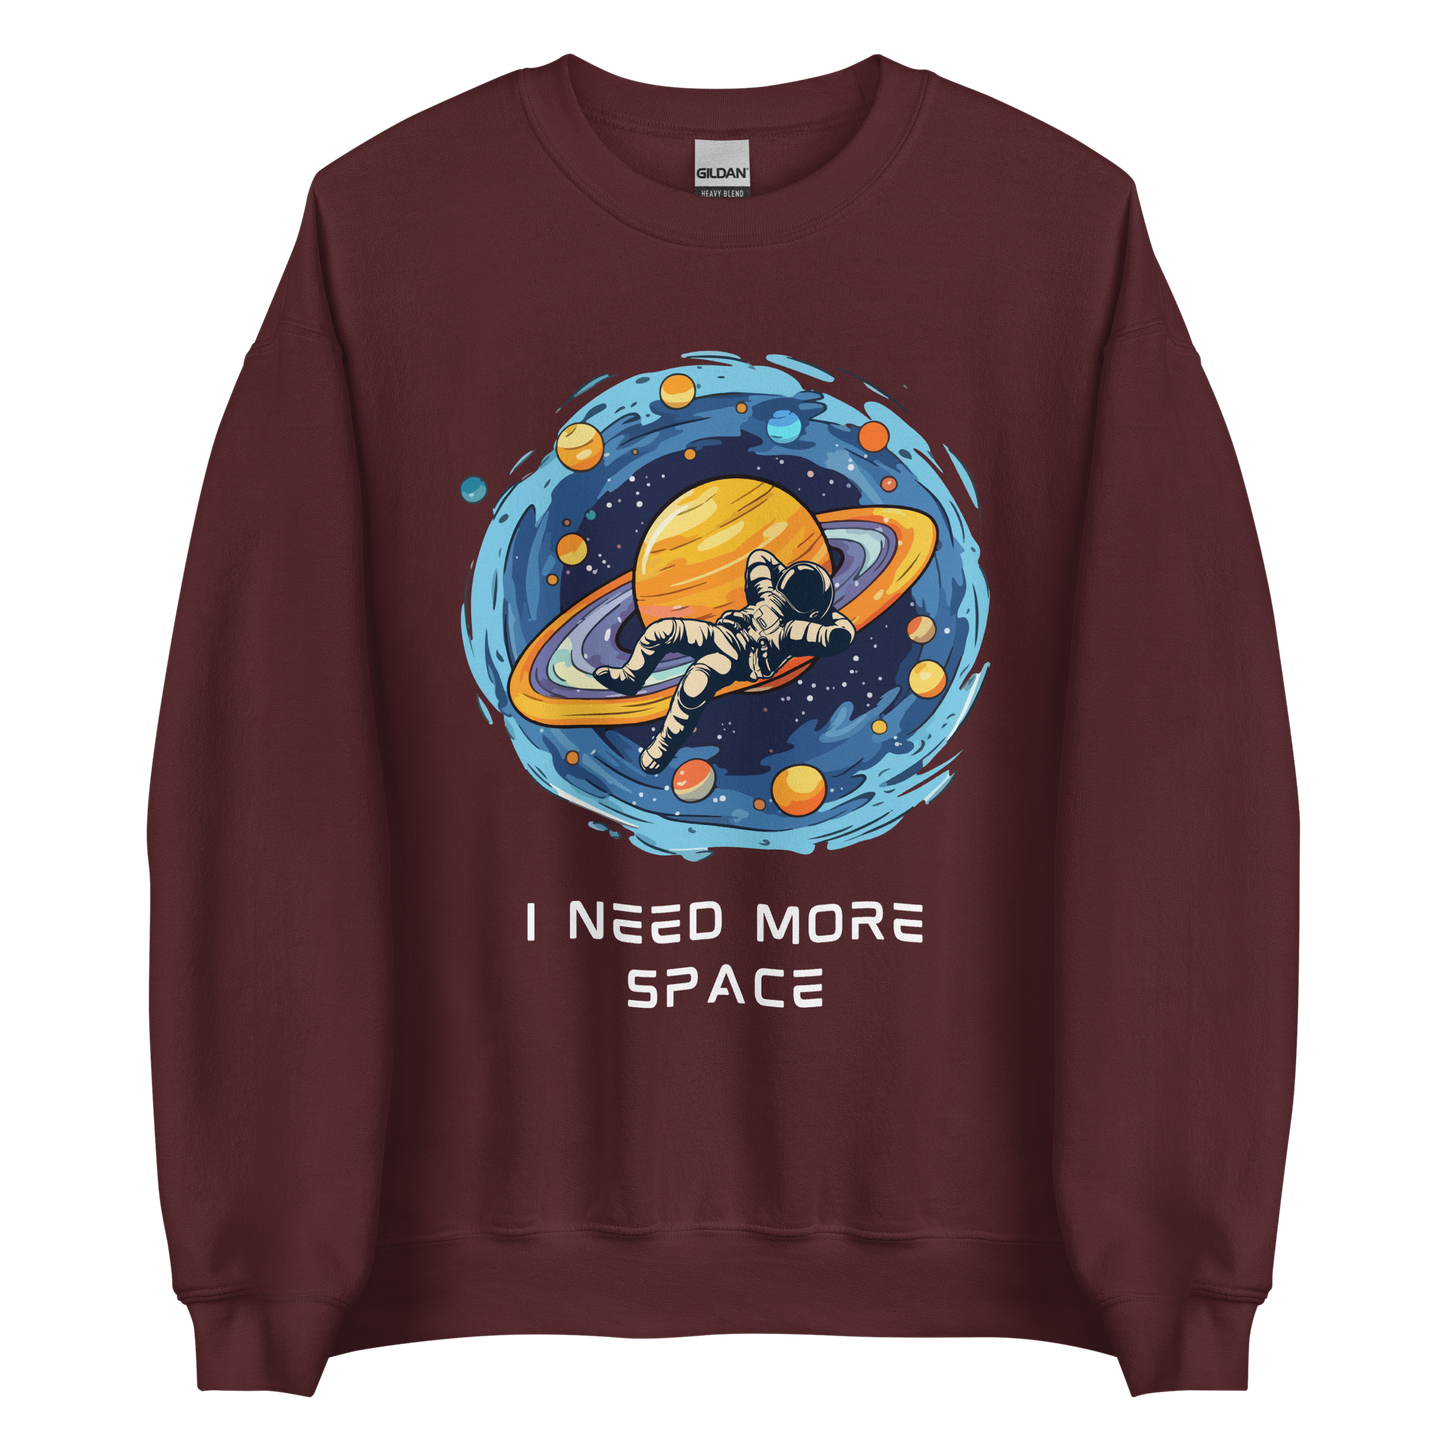 Maroon Astronaut Sweatshirt featuring a captivating I Need More Space graphic on the chest - Funny Graphic Space Sweatshirts - Boozy Fox